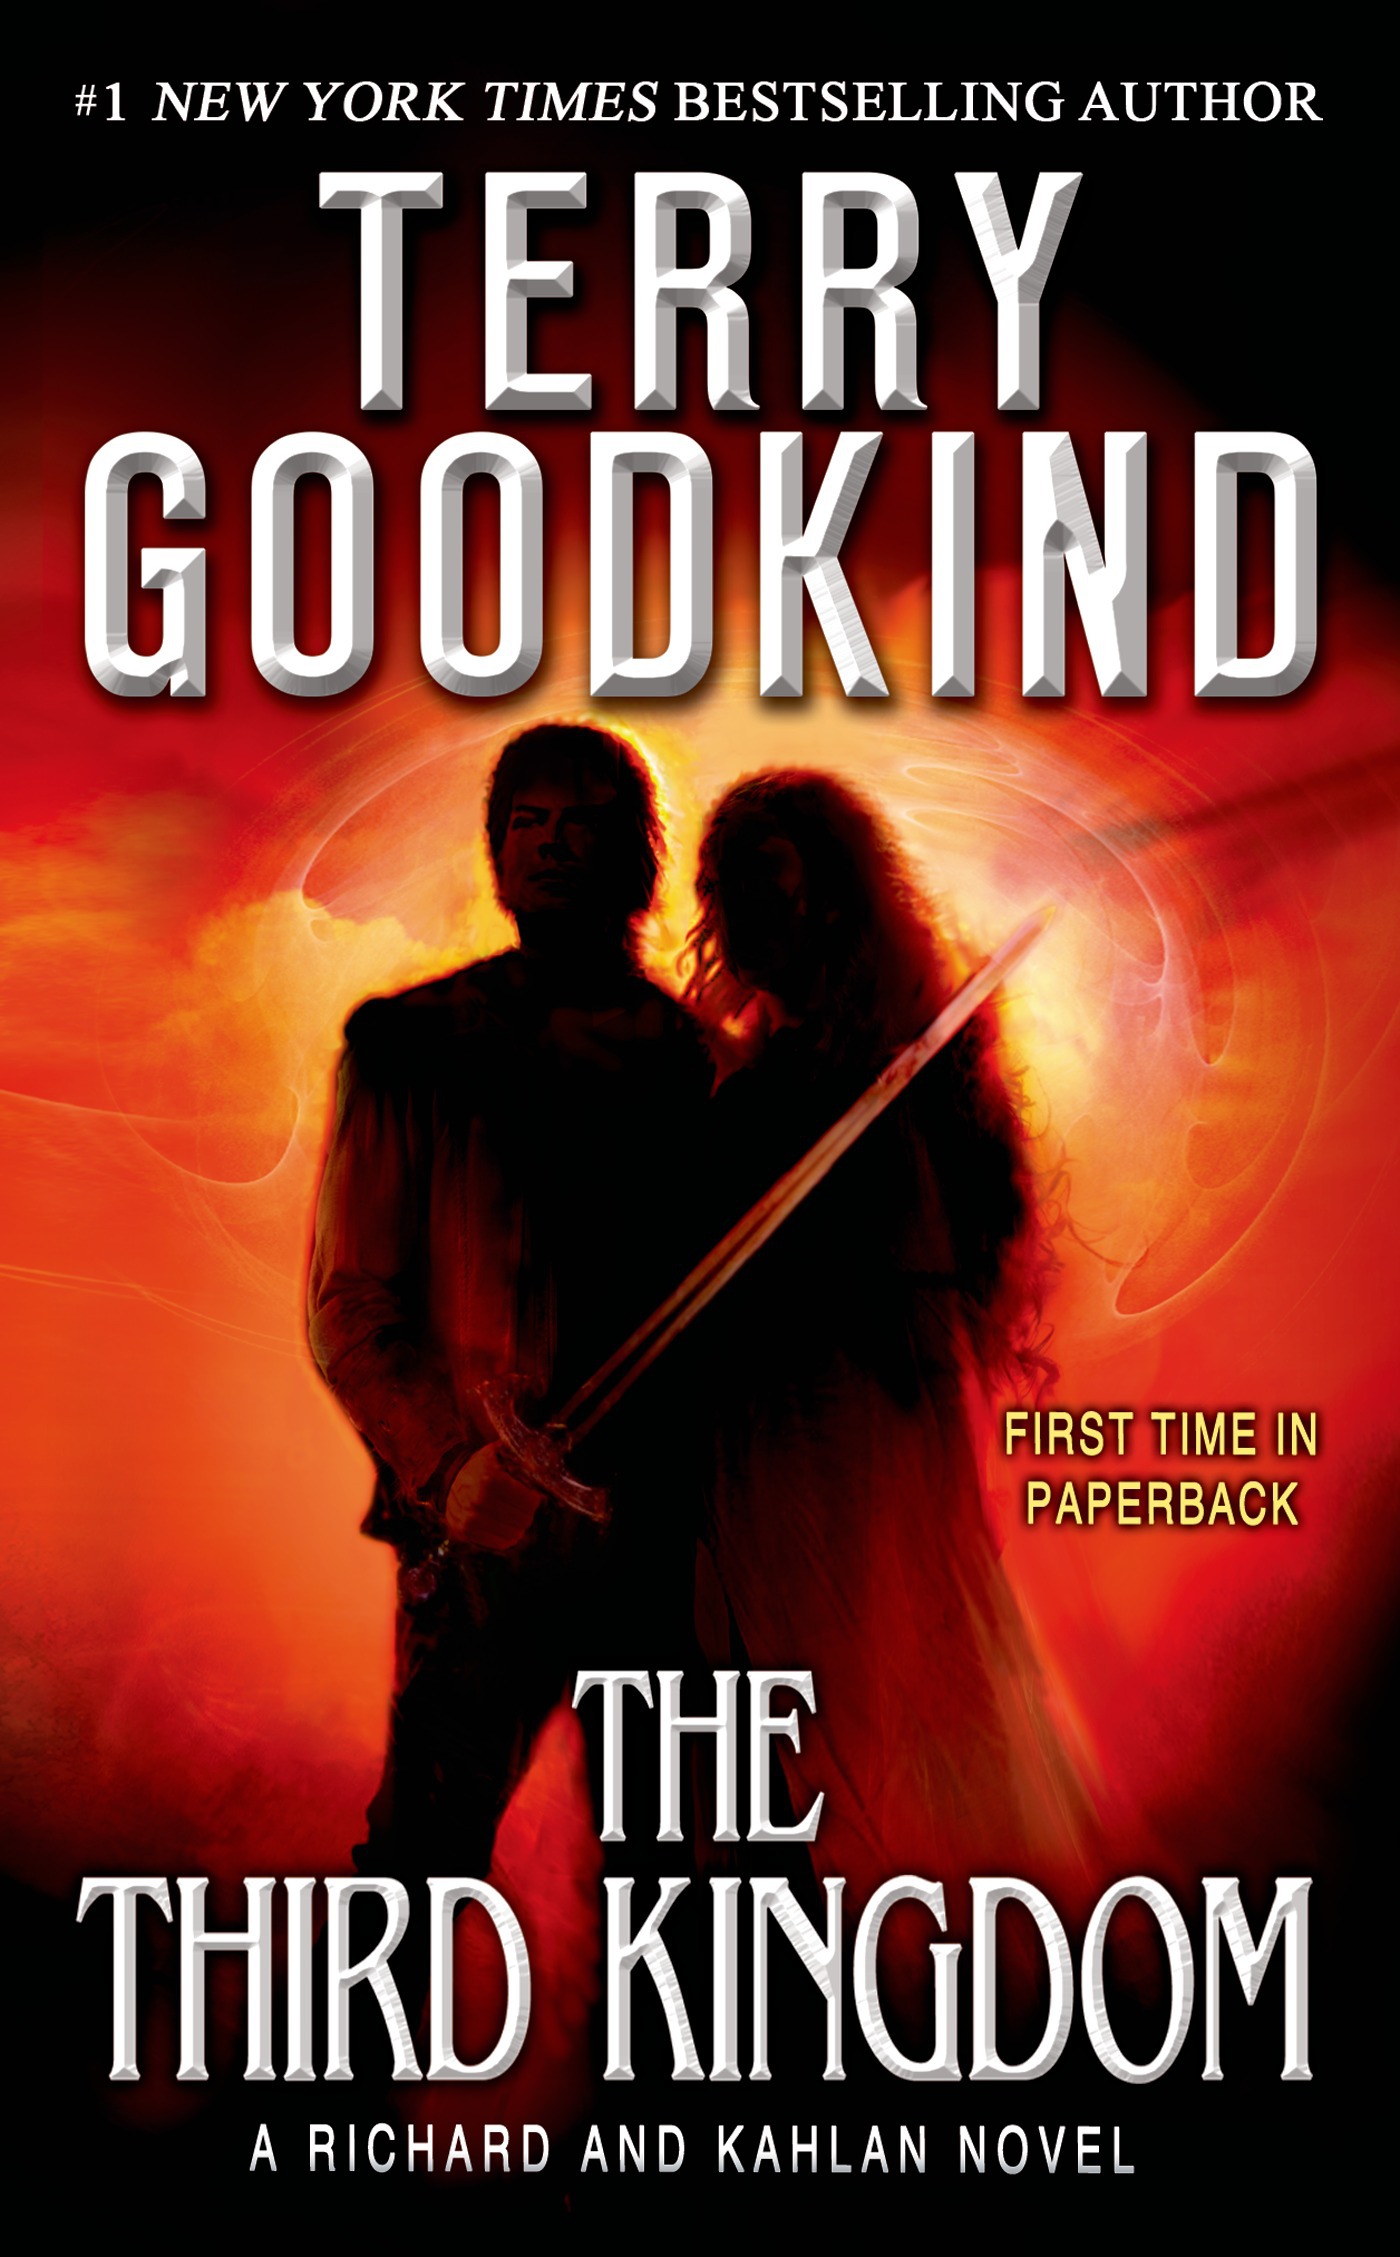 The Third Kingdom : A Richard and Kahlan Novel by Terry Goodkind